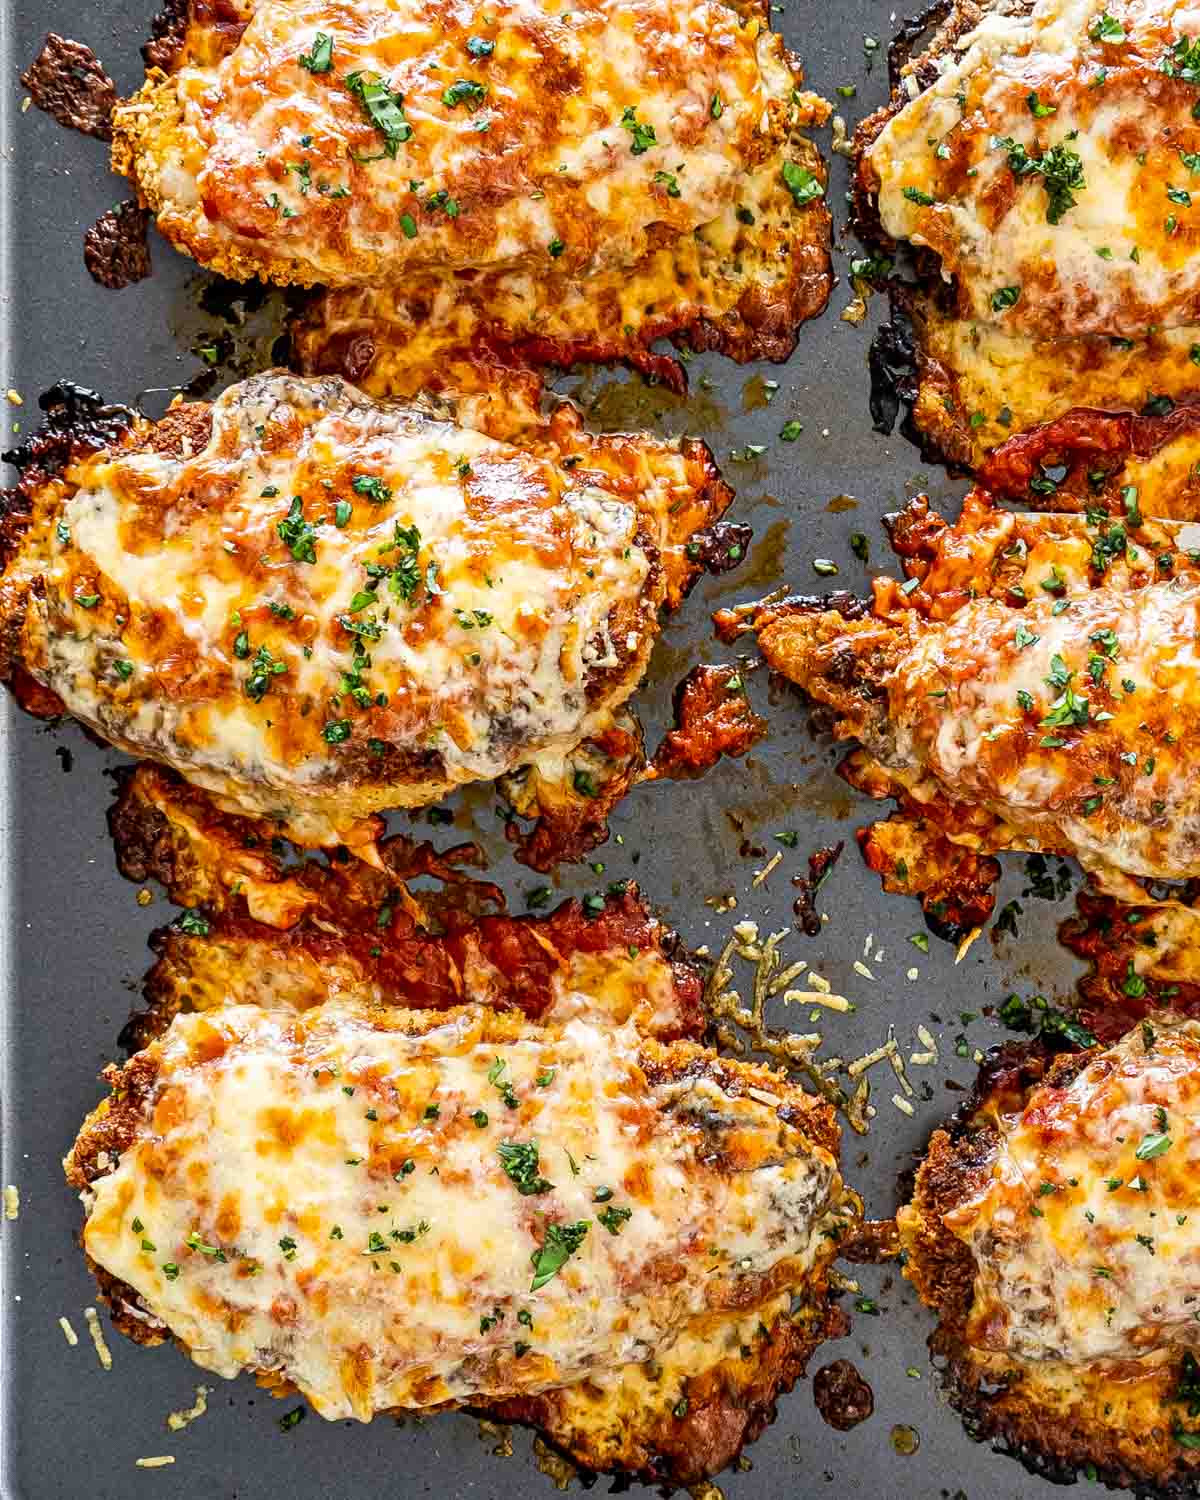 chicken parmesan on a baking sheet fresh out of the oven.